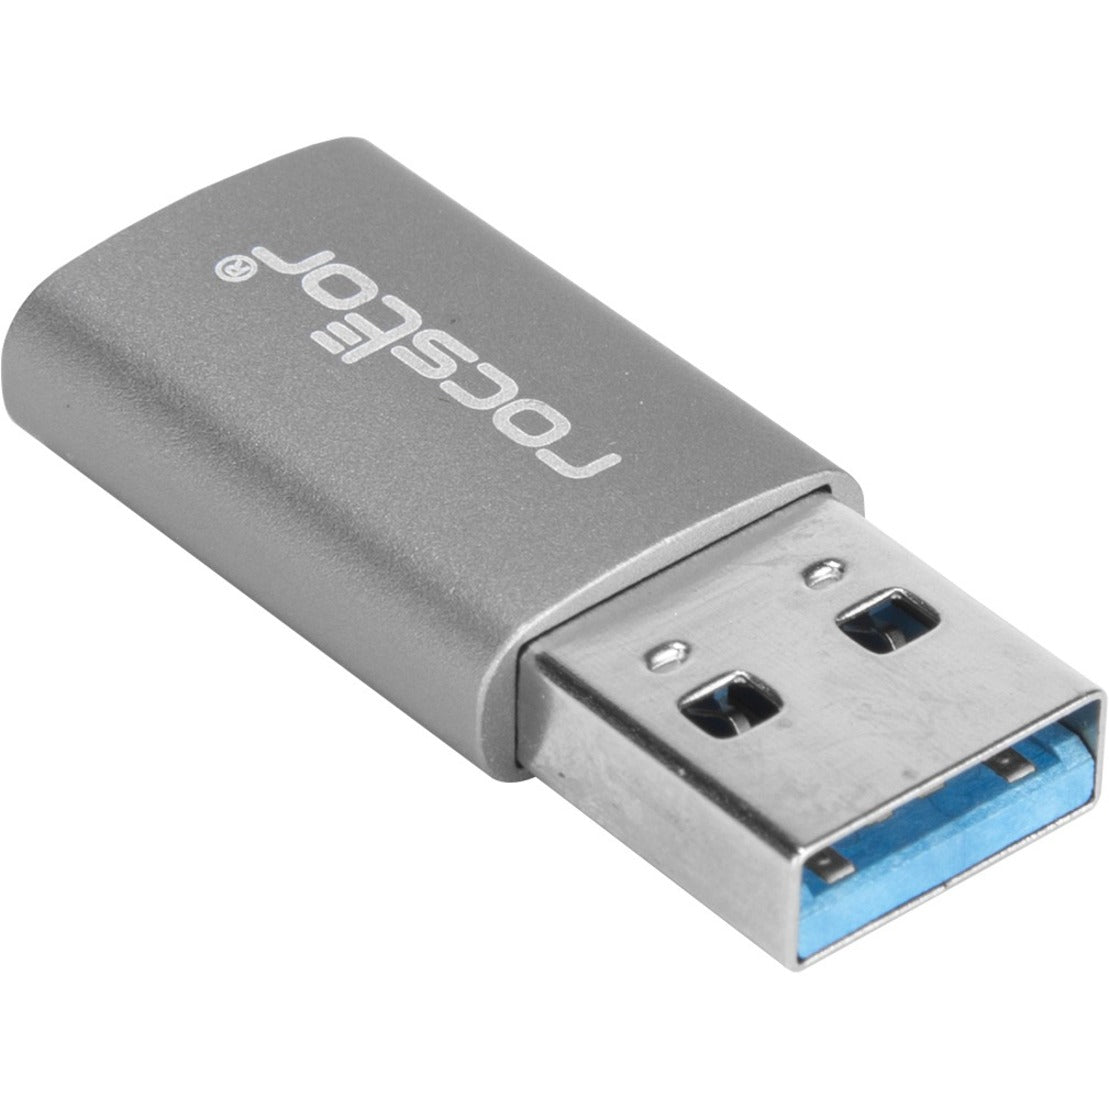 Rocstor Y10A207-G1 Premium USB 3.0 Hi-Speed Adapter, USB Type A to USB-C (M/F), Reversible, Charging, Molded